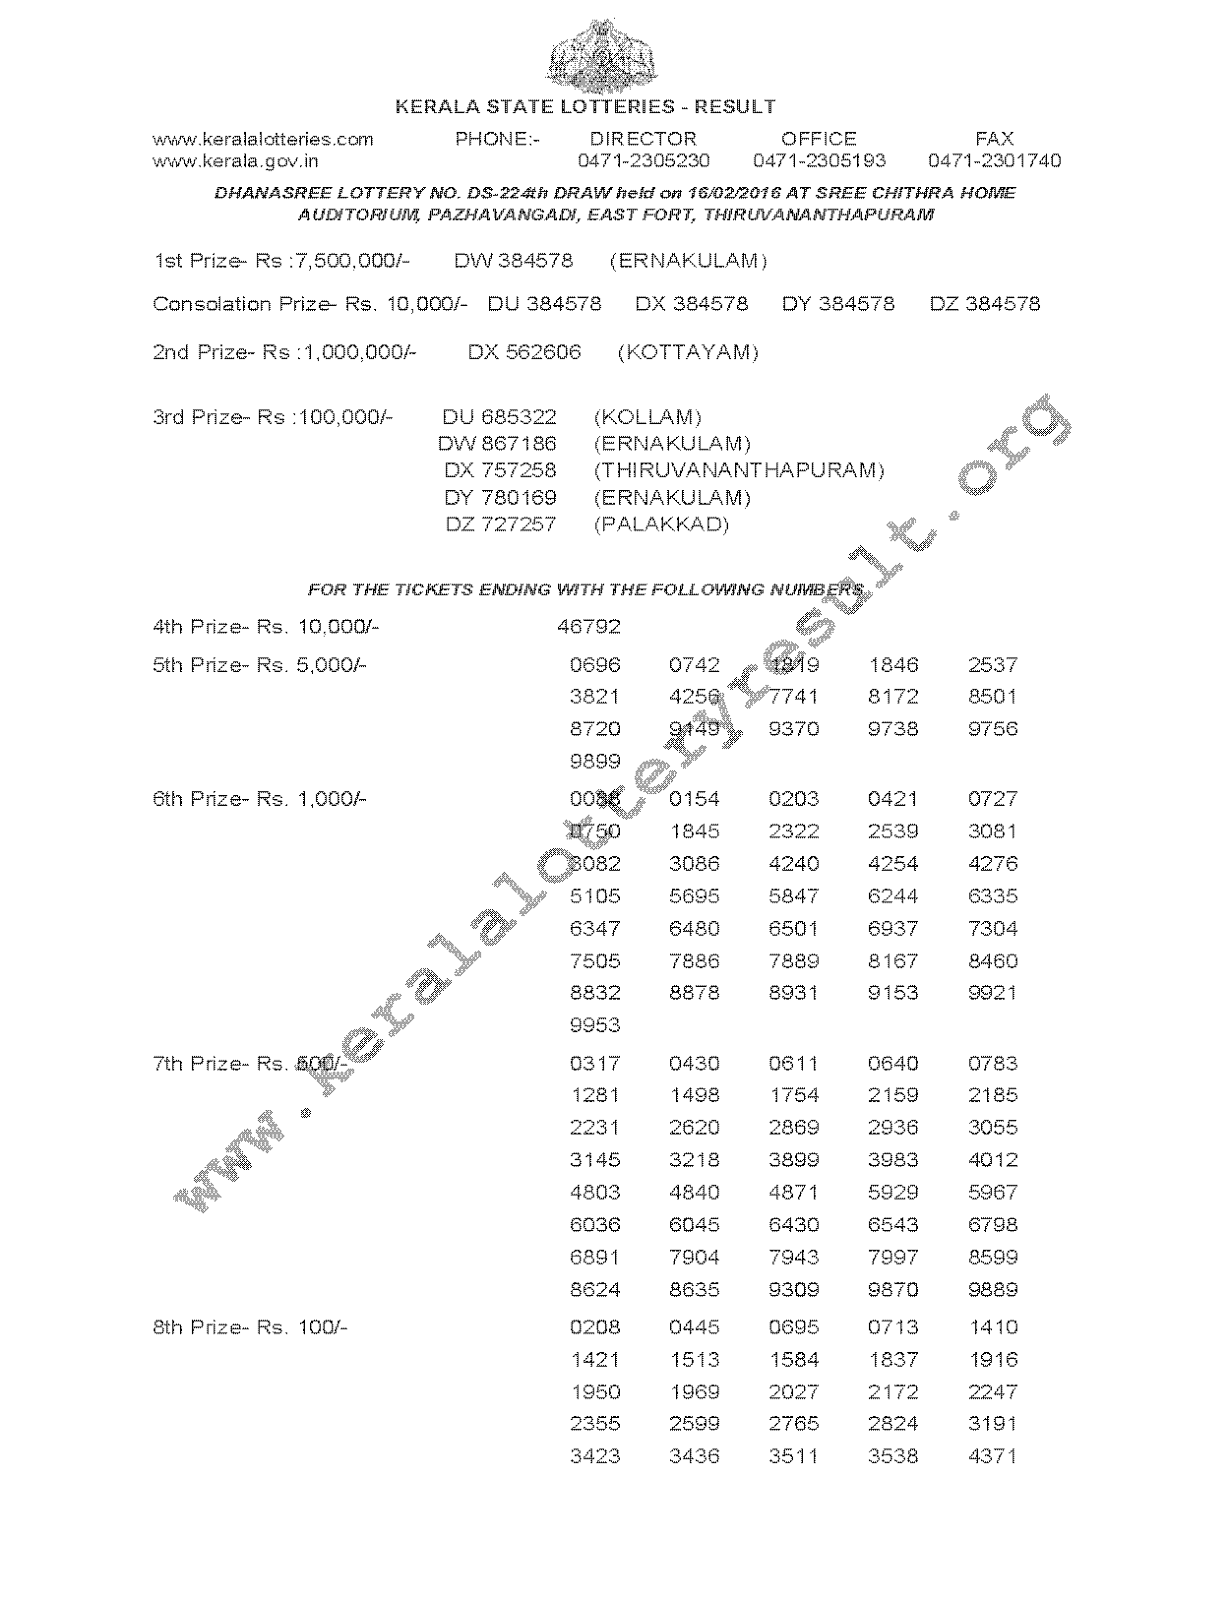 DHANASREE Lottery DS 224 Result 16-02-2016